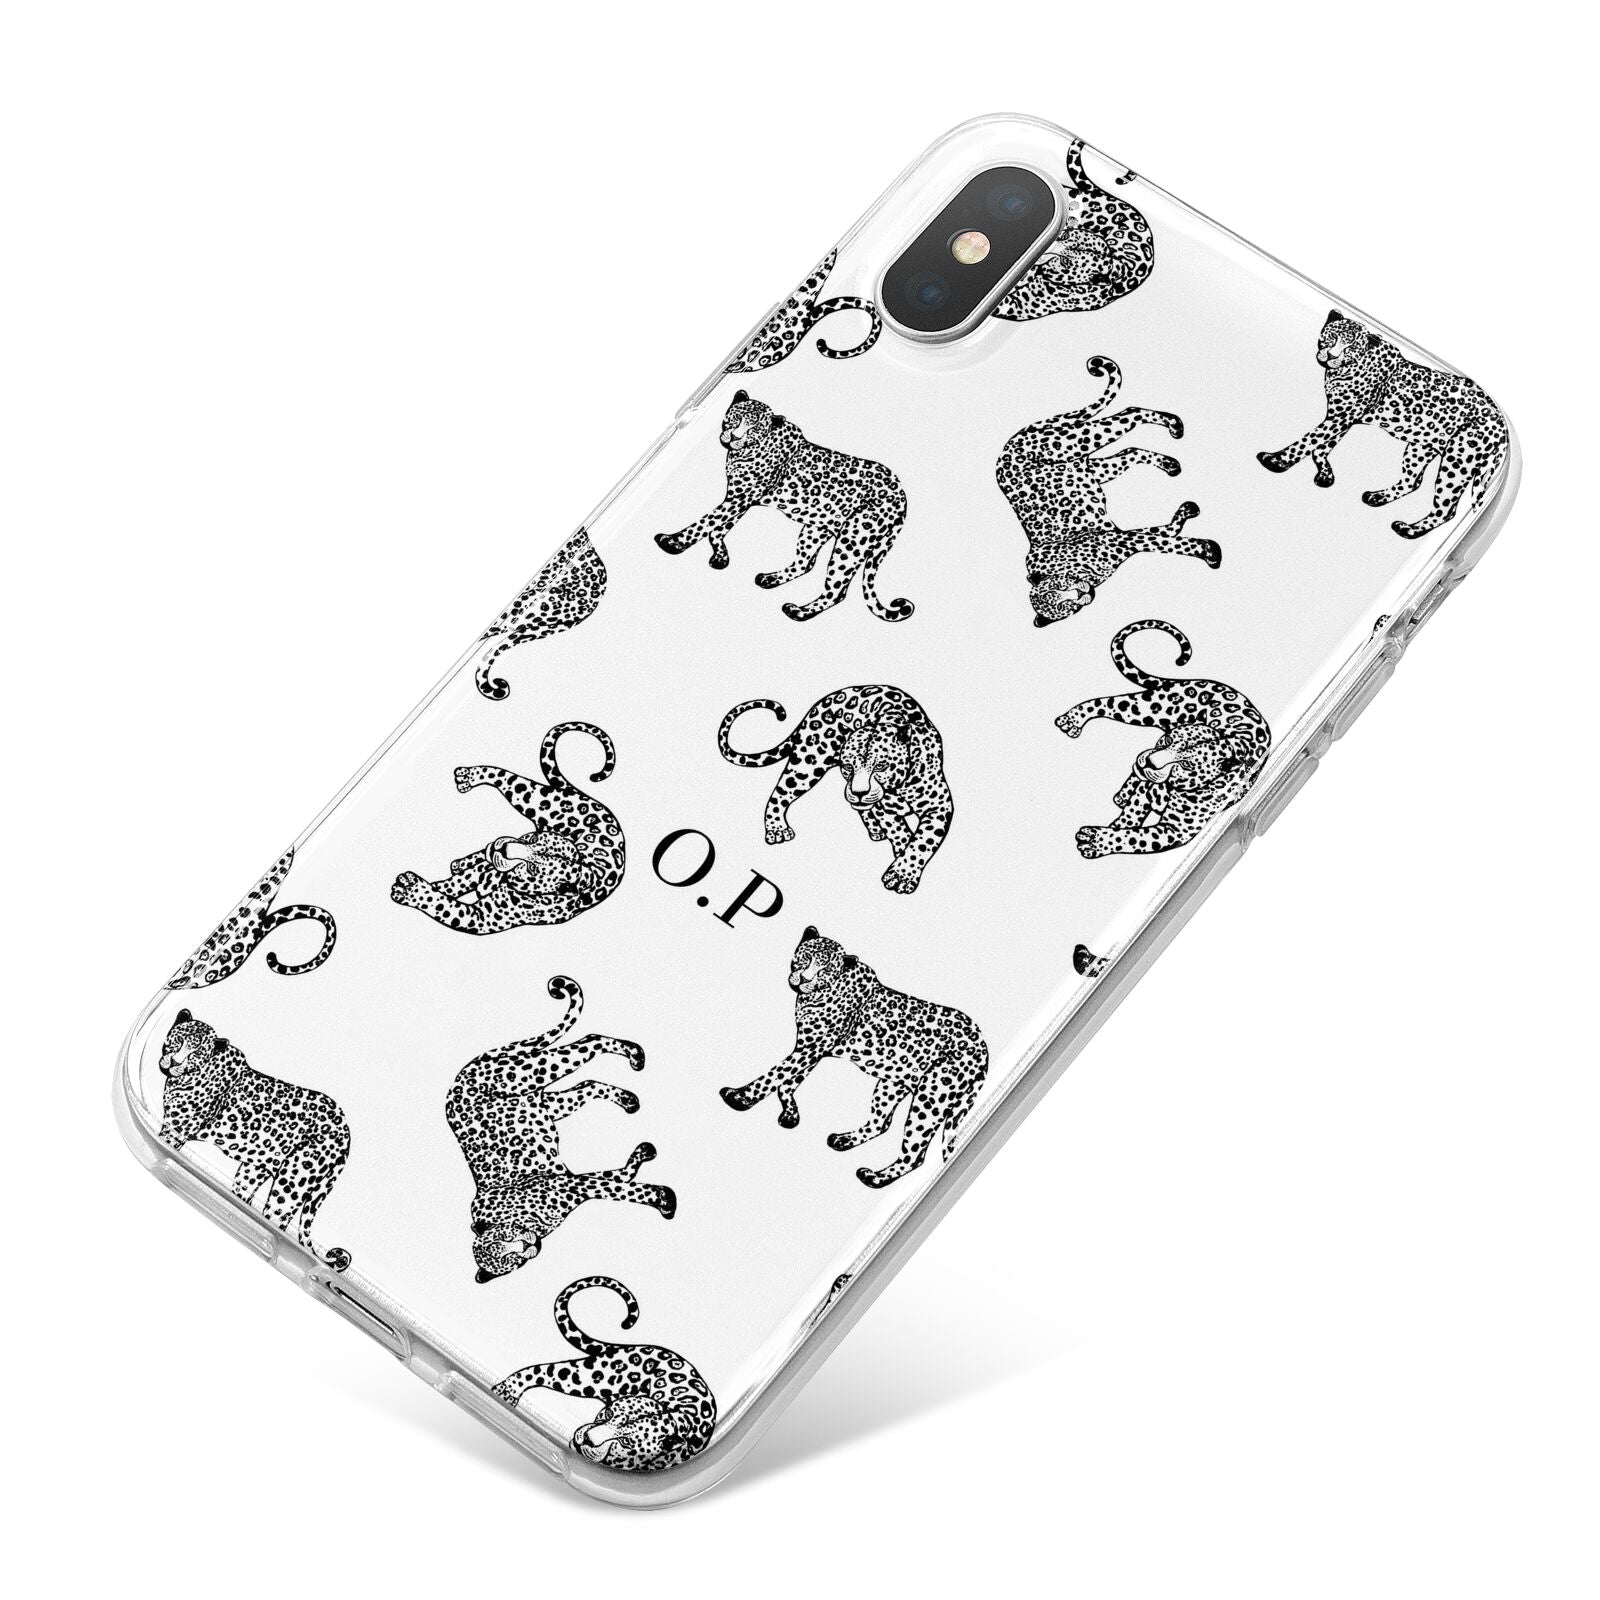 Monochrome Leopard Print Personalised iPhone X Bumper Case on Silver iPhone